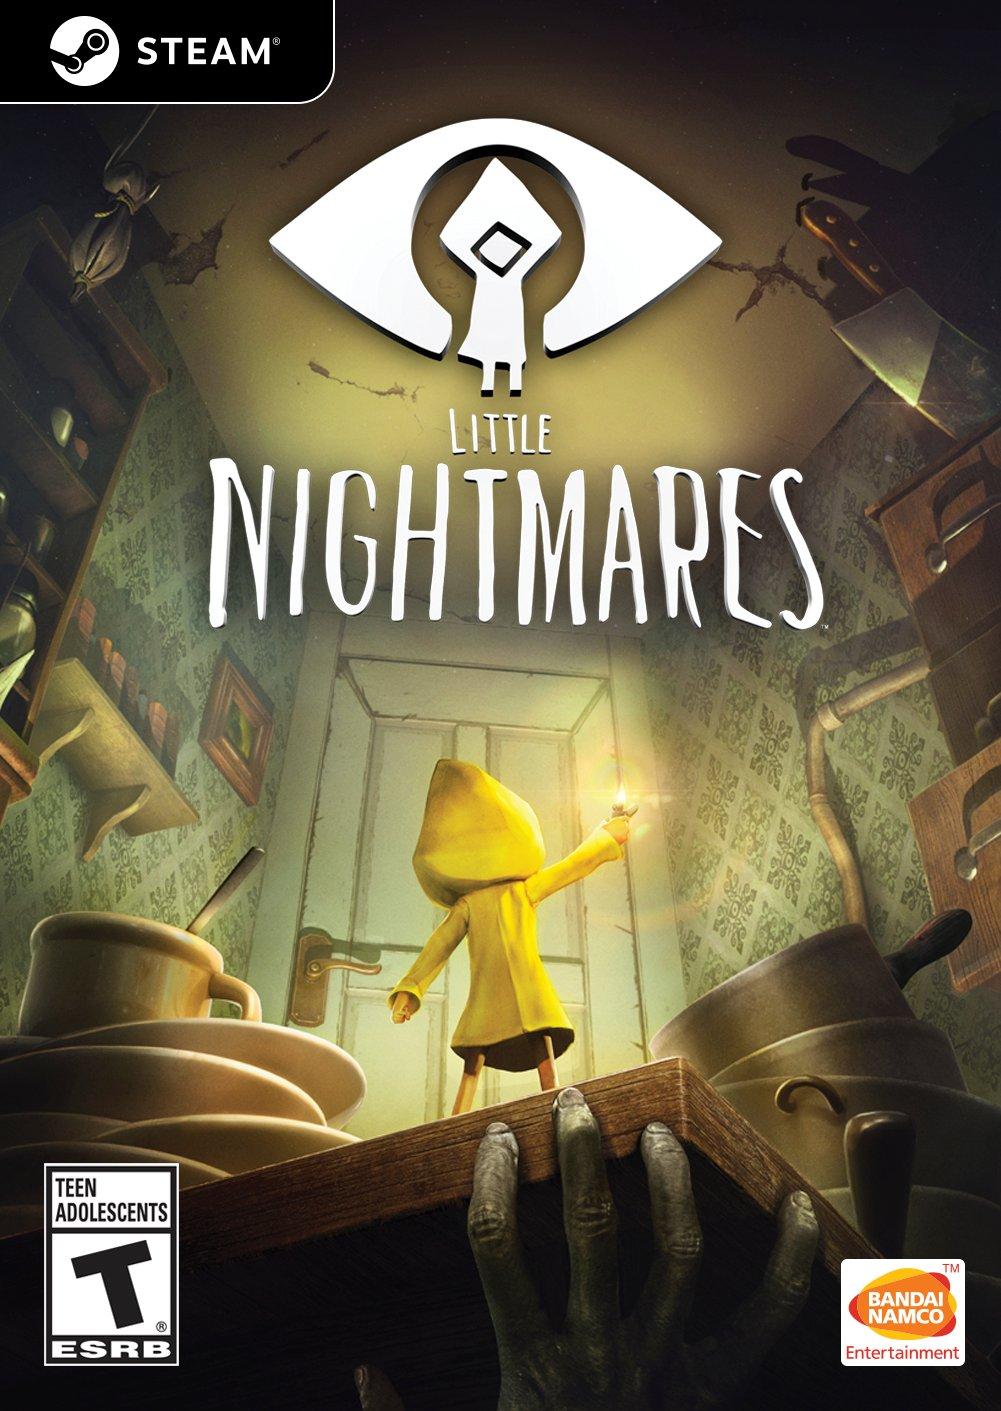 Little Nightmares Review - A Grotesque Tale That Plays Off The